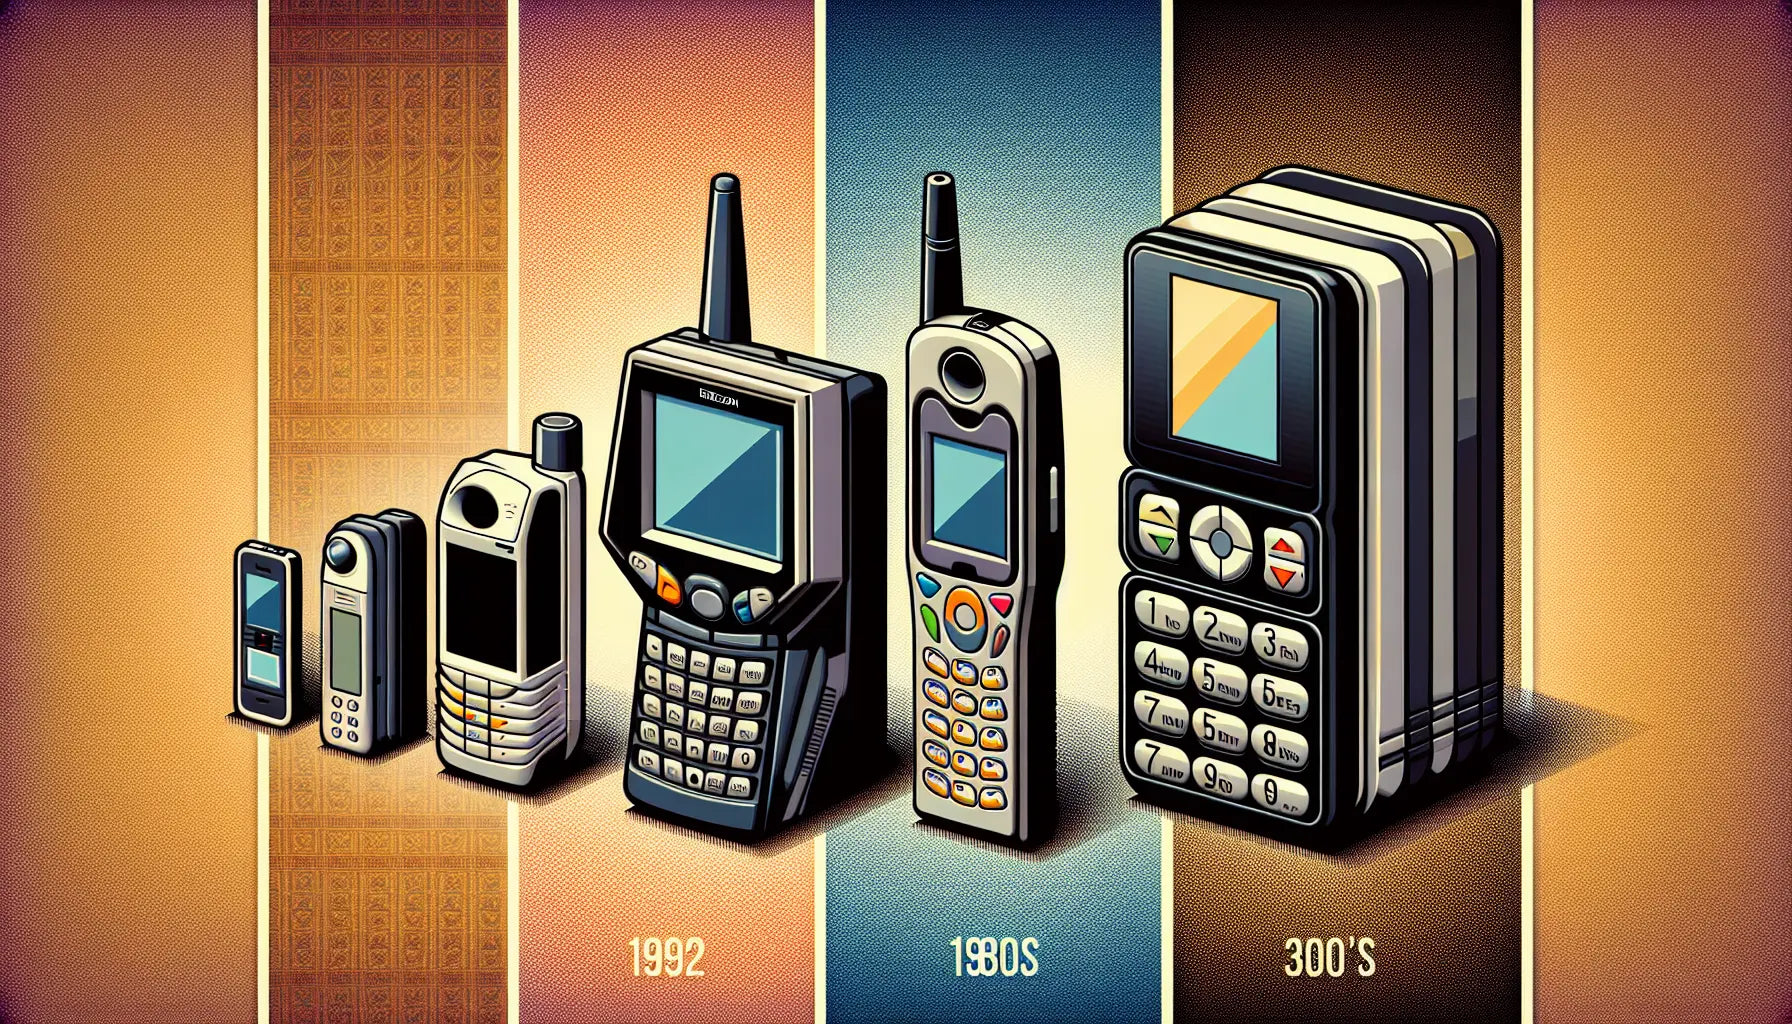 A Look Back at Iconic Mobile Phones That Shaped the Industry